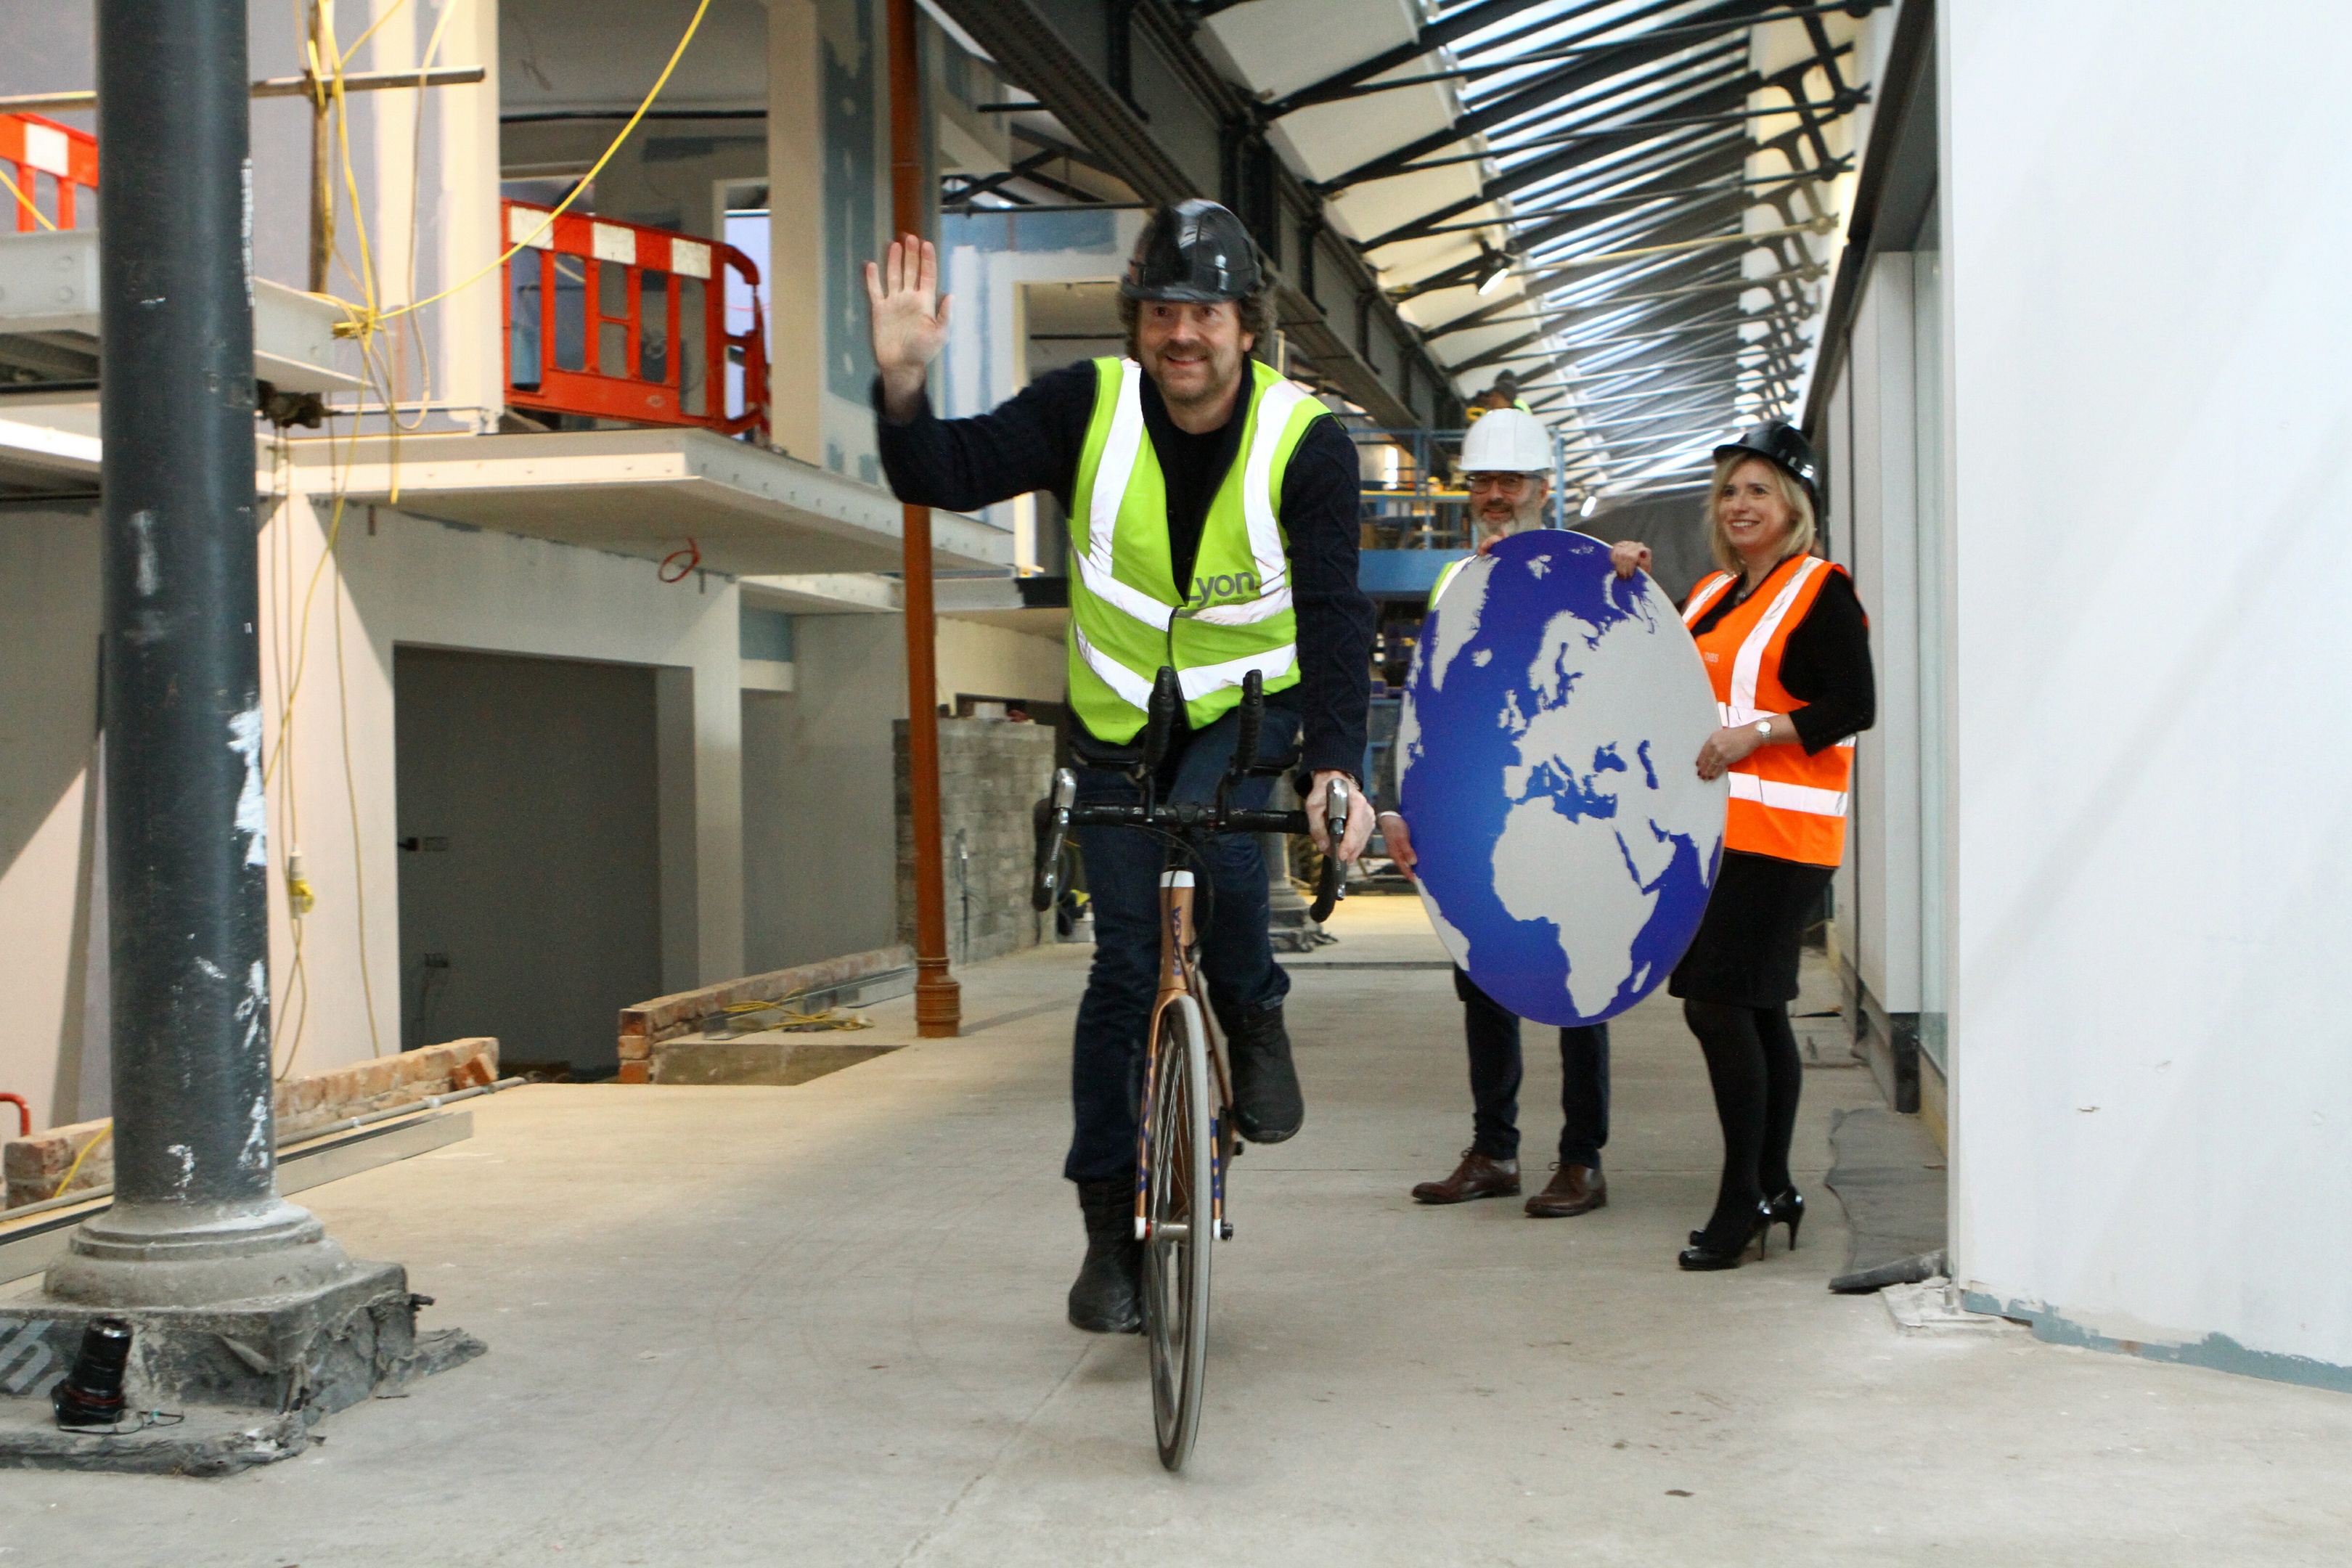 Entrepreneurial Conference.
Picture shows; L/R, Chris van der Kuyl, on Mark Beaumont's world record bike, with John Robertson - Director of Robertson Collaborate, and Amanda Robertson - MD Stoneridge Electronics, at the Water's Edge development at Shed 25 City Quay today for the launch of the Entrepreneurial Conference. Wednesday 28th February 2018.